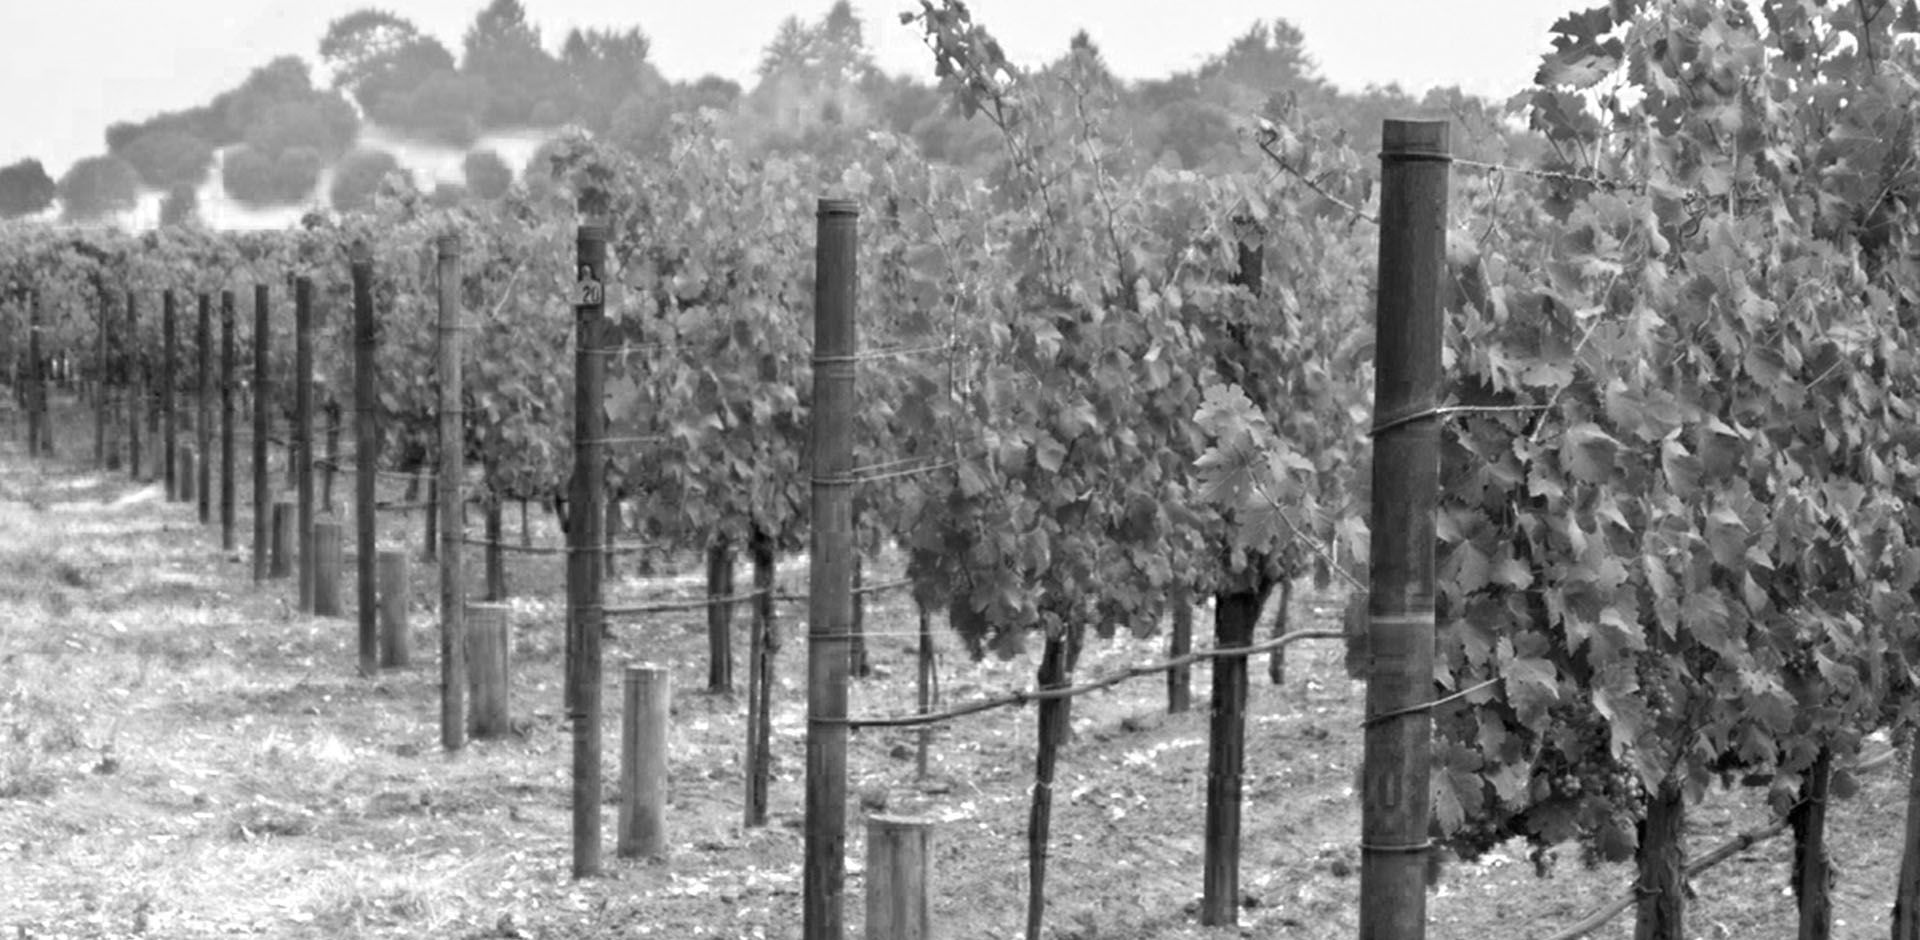 Forthright Winery Vineyard Rows